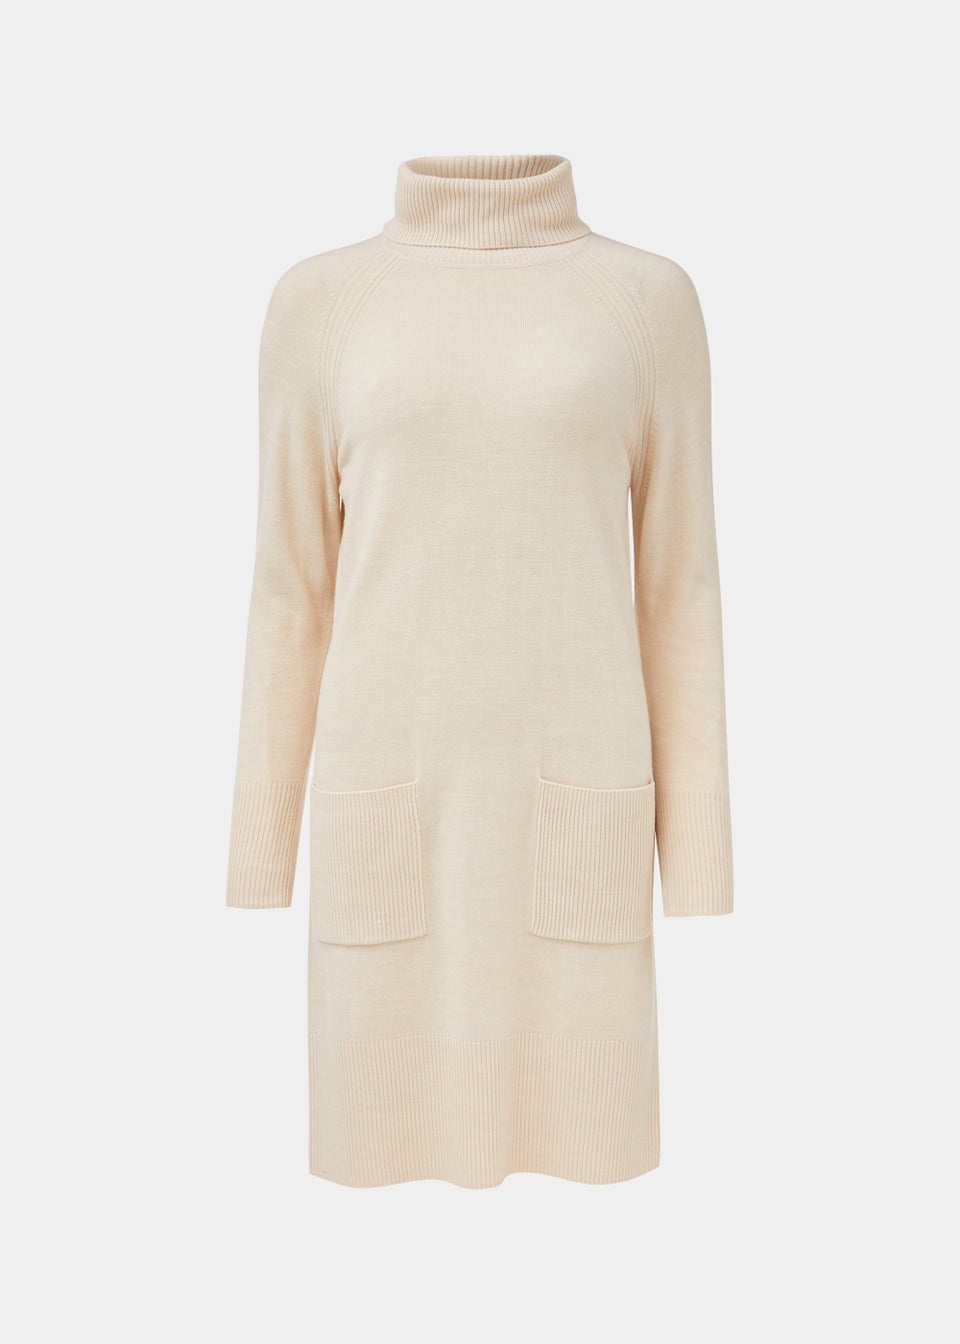 Taupe Super Soft Roll Neck Knitted Tunic Dress - Matalan